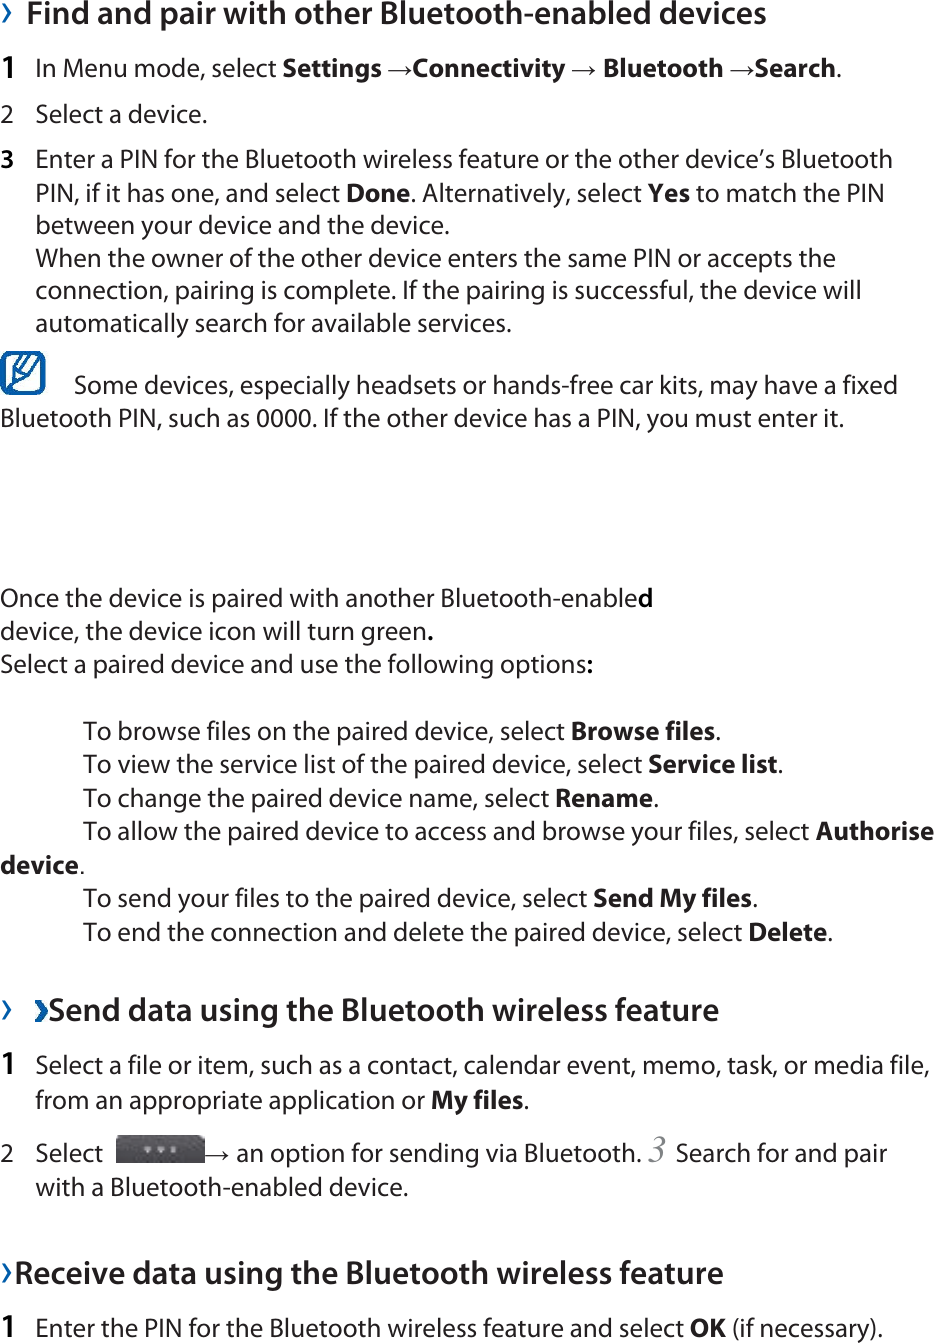  › Find and pair with other Bluetooth-enabled devices   1  In Menu mode, select Settings →Connectivity → Bluetooth →Search.  2 Select a device.  3  Enter a PIN for the Bluetooth wireless feature or the other device’s Bluetooth PIN, if it has one, and select Done. Alternatively, select Yes to match the PIN between your device and the device.   When the owner of the other device enters the same PIN or accepts the connection, pairing is complete. If the pairing is successful, the device will automatically search for available services.     Some devices, especially headsets or hands-free car kits, may have a fixed Bluetooth PIN, such as 0000. If the other device has a PIN, you must enter it.   Once the device is paired with another Bluetooth-enabled device, the device icon will turn green. Select a paired device and use the following options:   To browse files on the paired device, select Browse files.   To view the service list of the paired device, select Service list.   To change the paired device name, select Rename.   To allow the paired device to access and browse your files, select Authorise device.   To send your files to the paired device, select Send My files.   To end the connection and delete the paired device, select Delete.   ›  Send data using the Bluetooth wireless feature   1  Select a file or item, such as a contact, calendar event, memo, task, or media file, from an appropriate application or My files.  2 Select  → an option for sending via Bluetooth. 3 Search for and pair with a Bluetooth-enabled device.   ›Receive data using the Bluetooth wireless feature   1  Enter the PIN for the Bluetooth wireless feature and select OK (if necessary).   